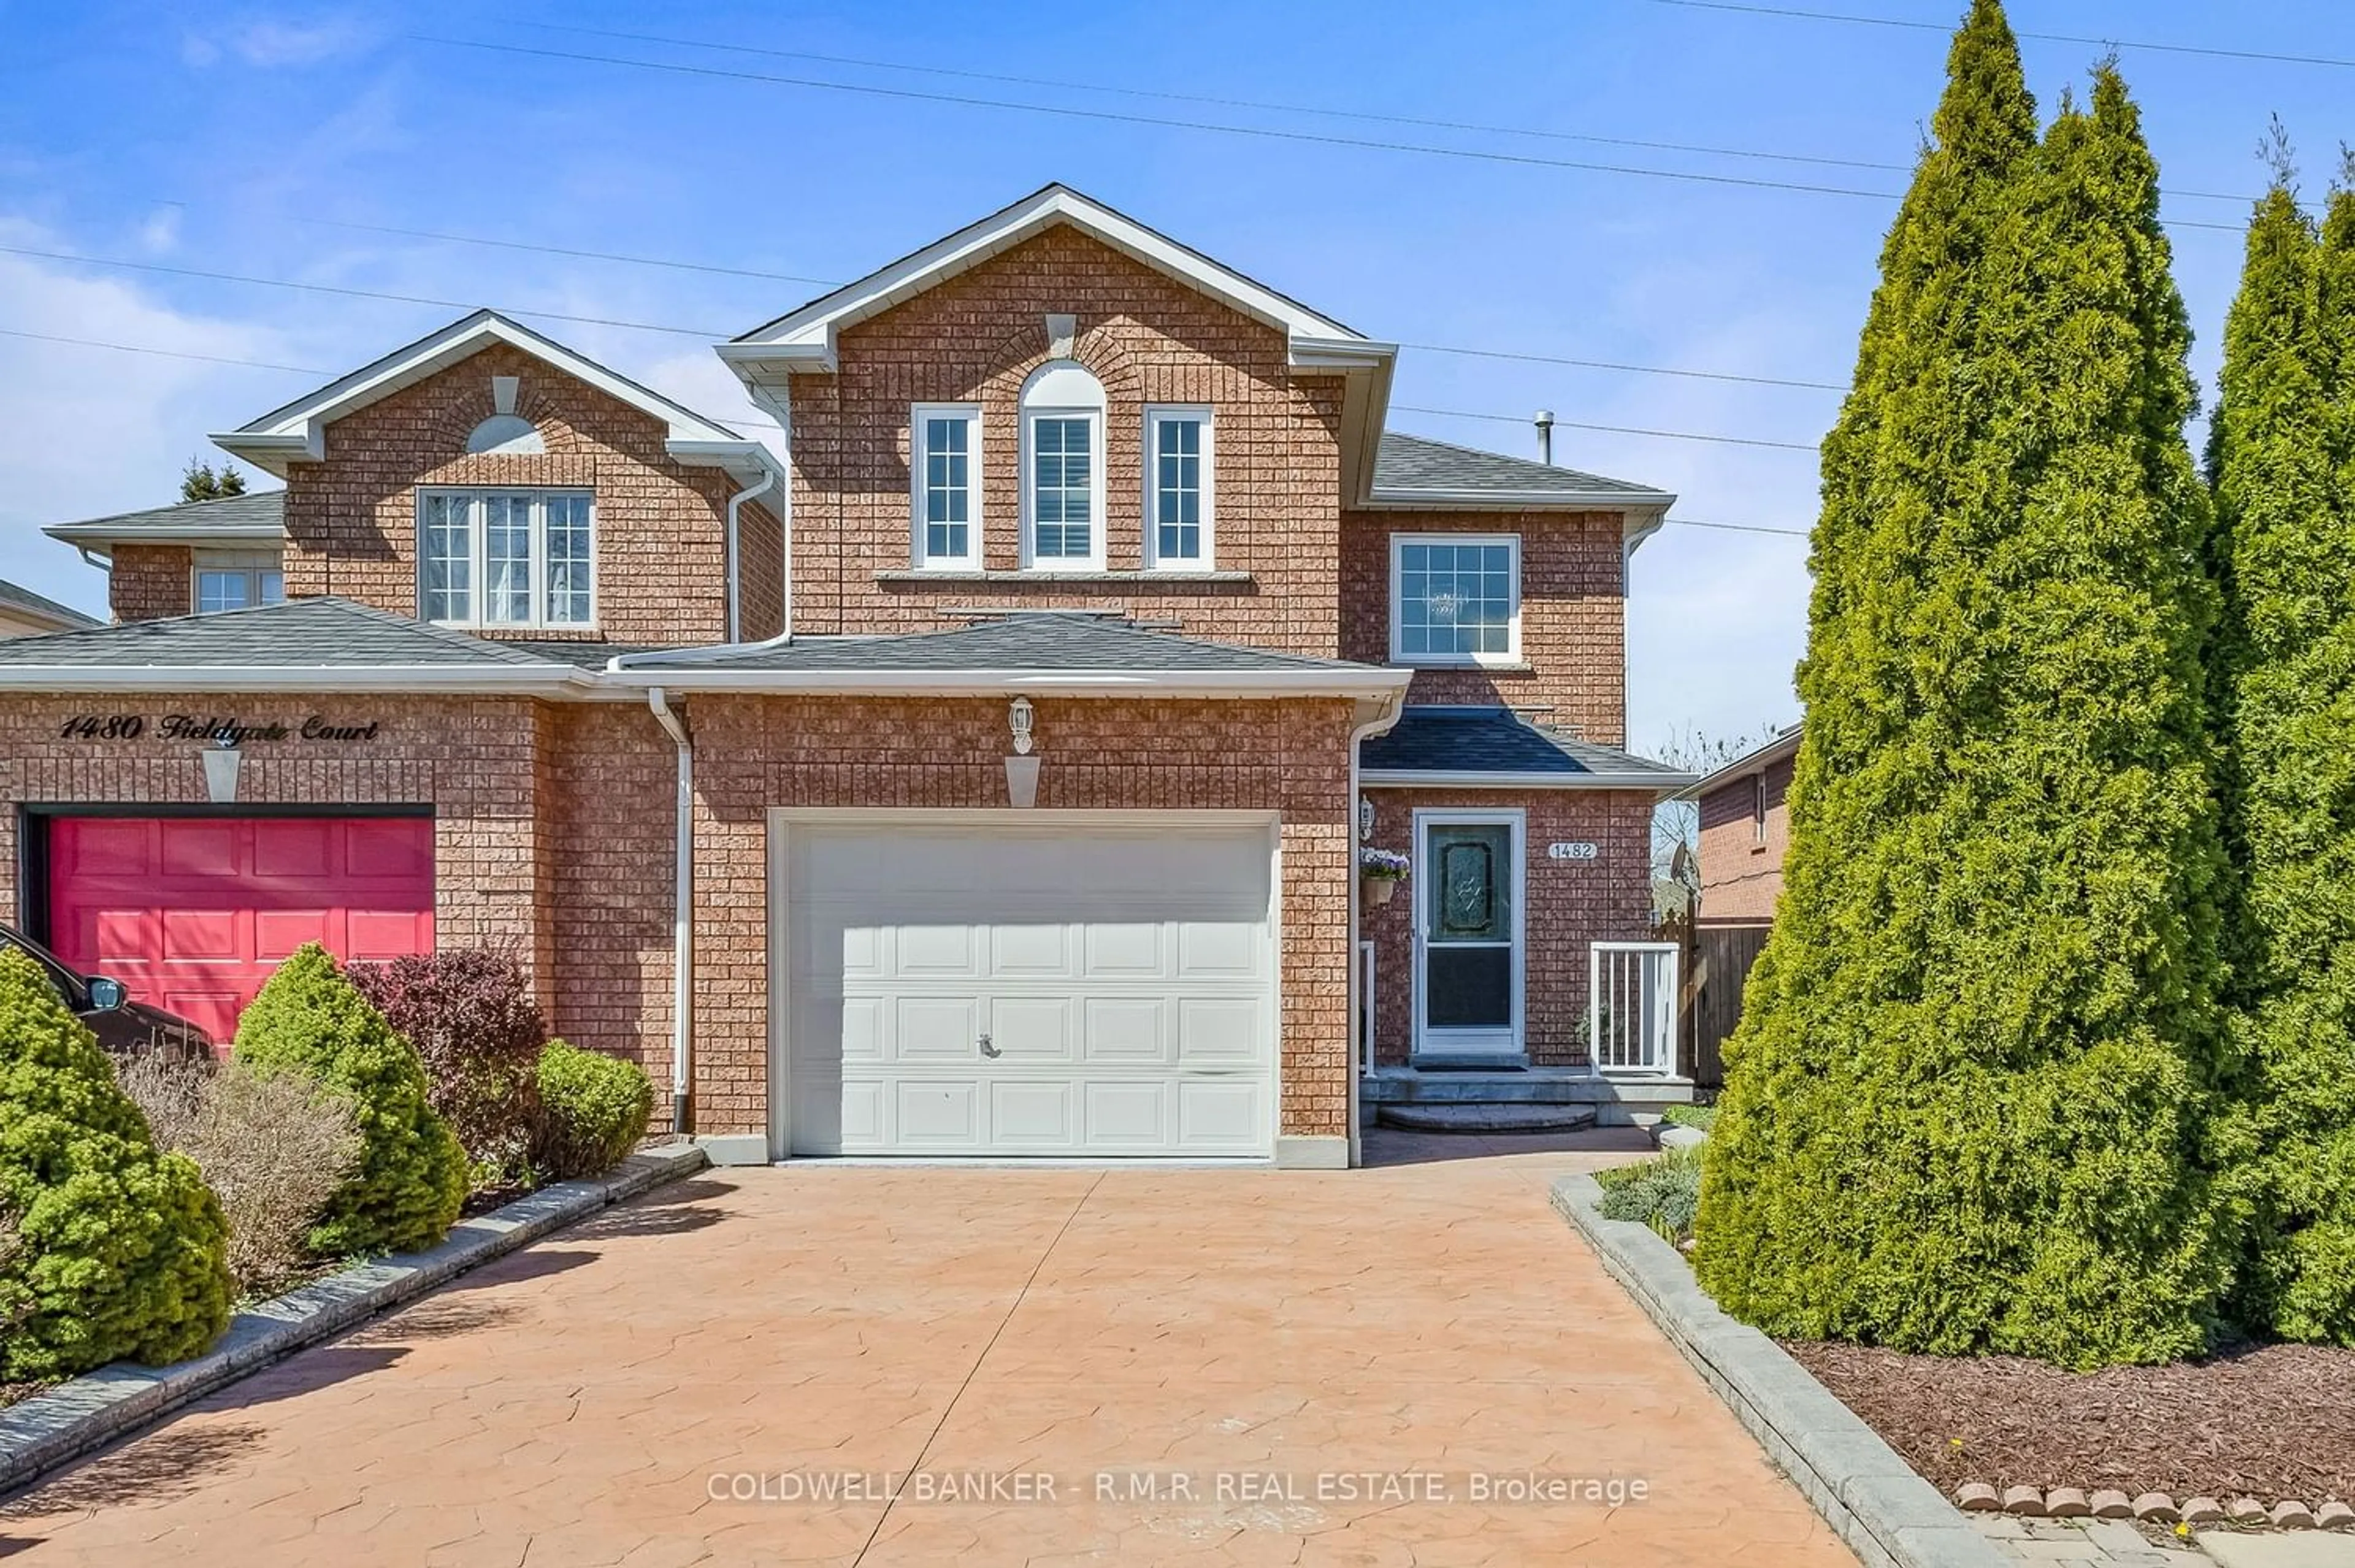 Home with brick exterior material for 1482 Fieldgate Crt, Oshawa Ontario L1K 2L6